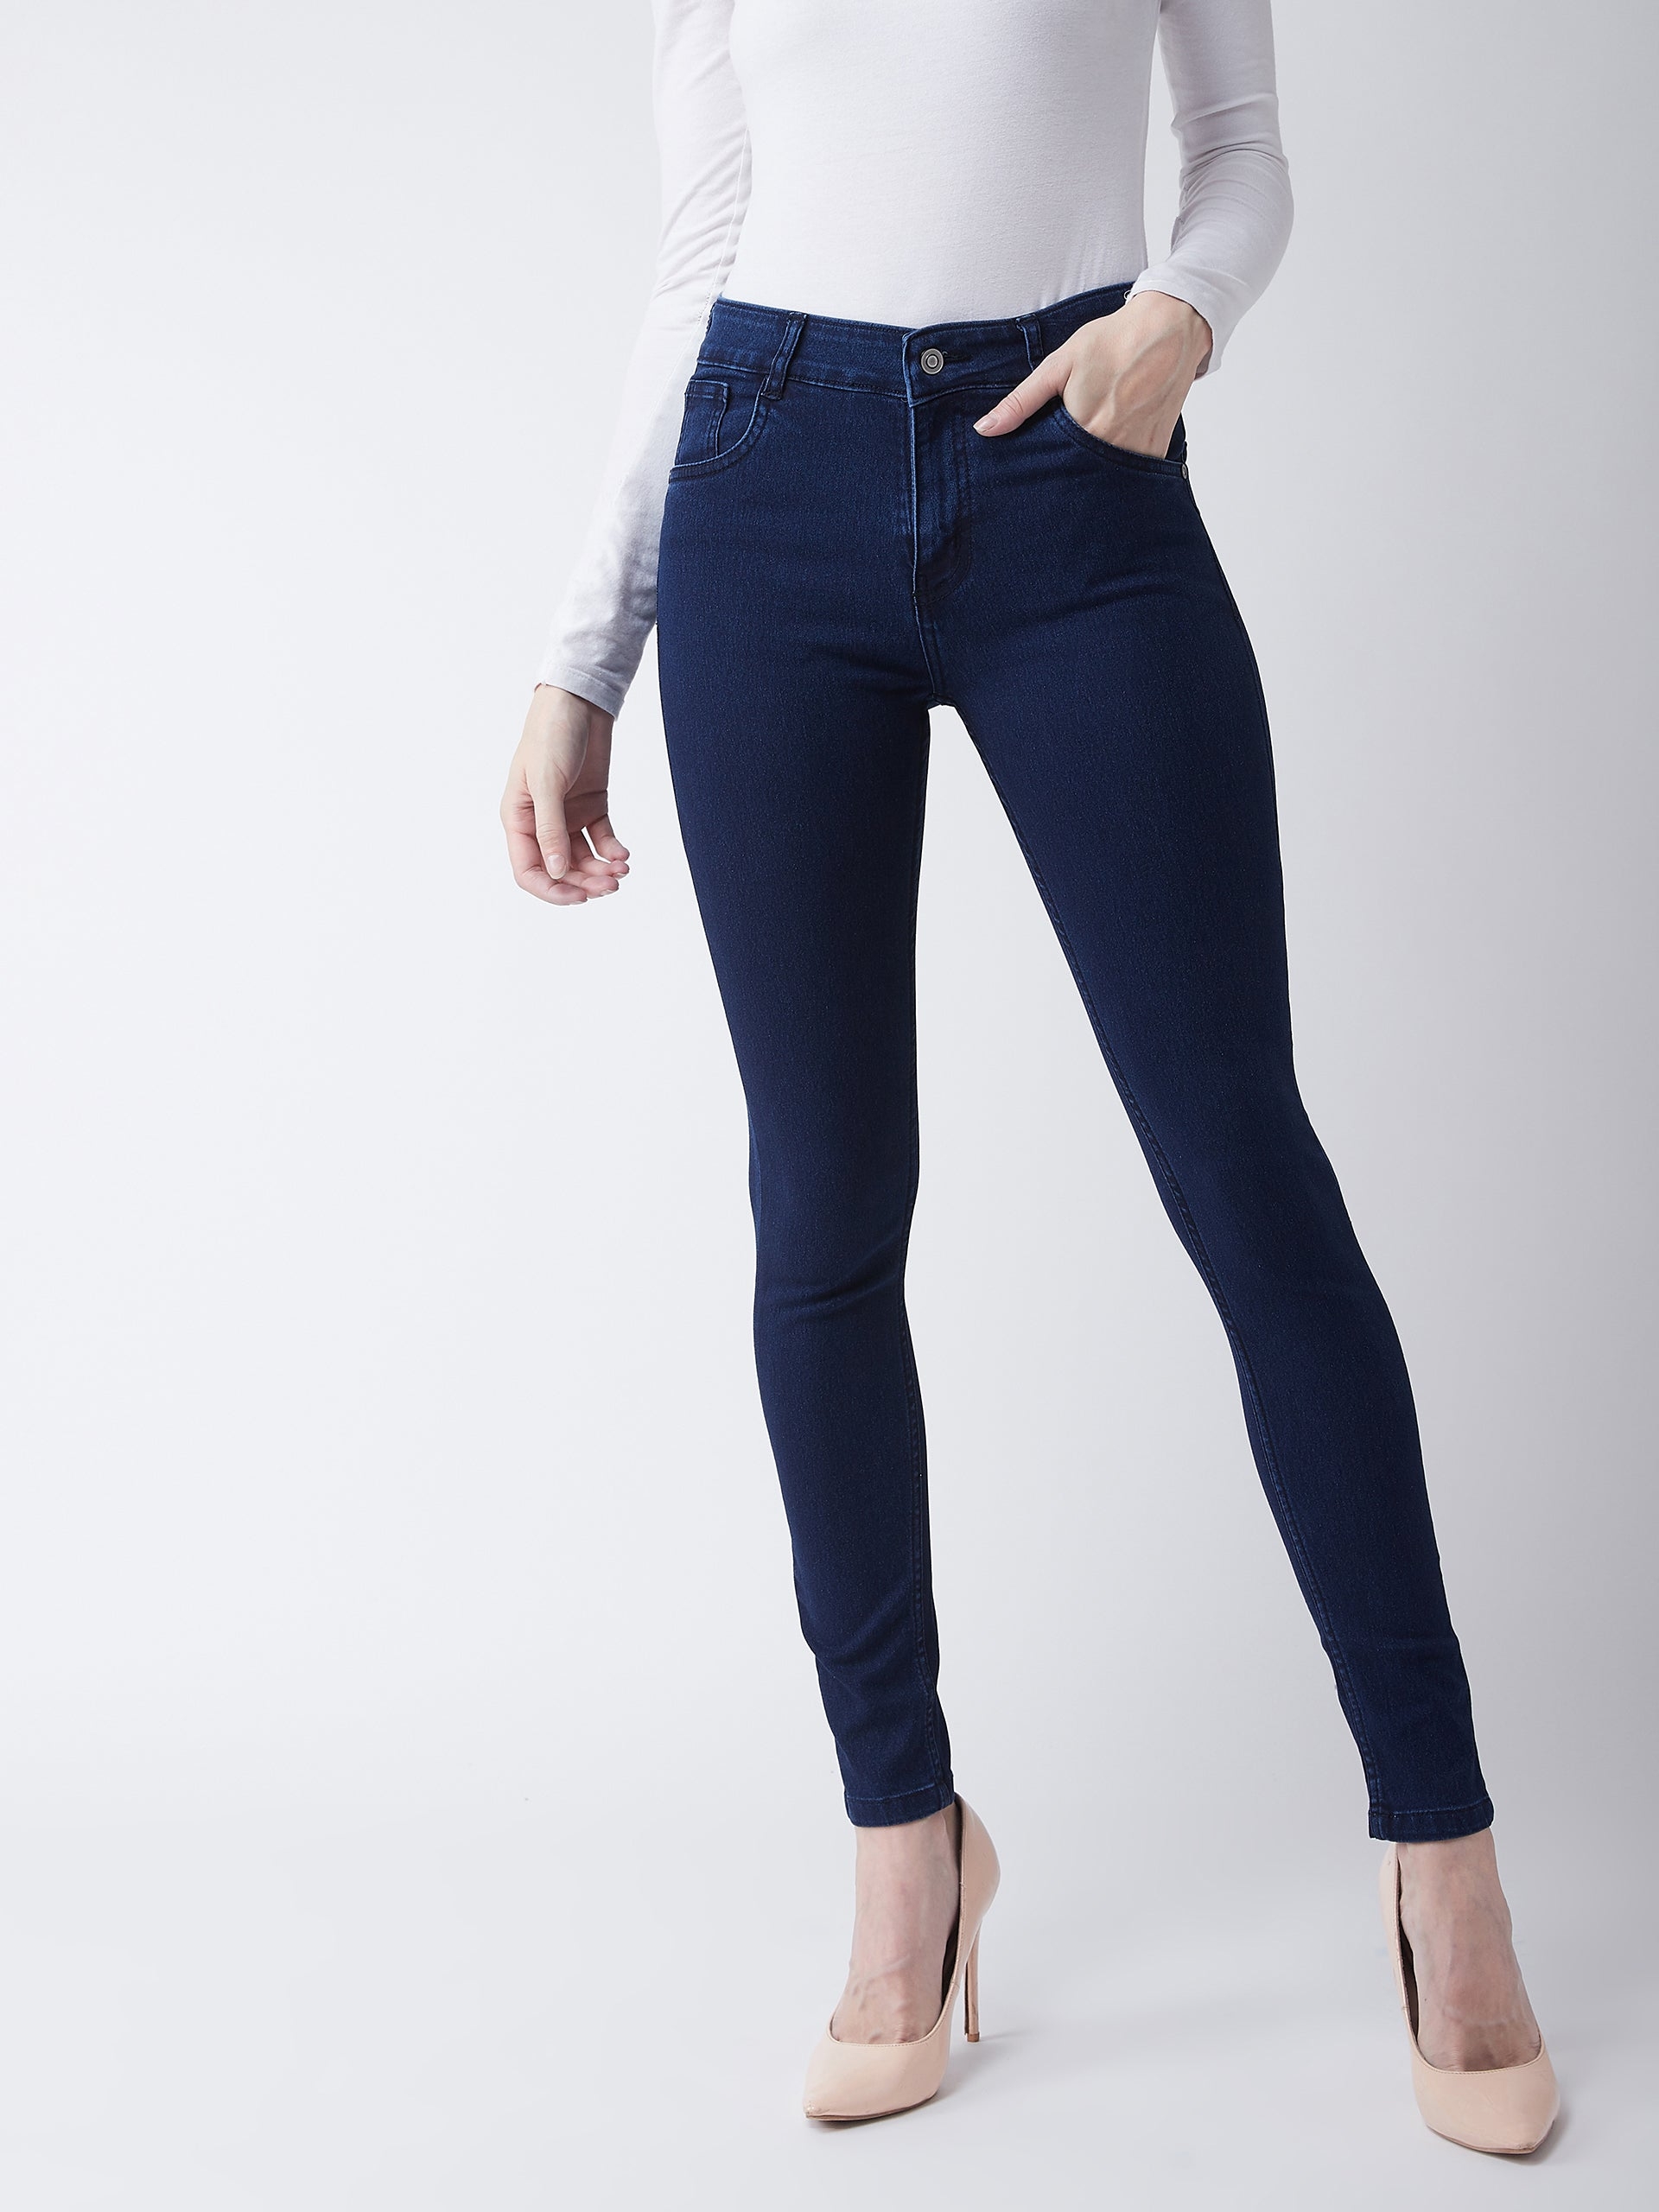 MISS CHASE | Navy Blue Skinny Fit Mid Rise Regular Length Denim Stretchable Jeans